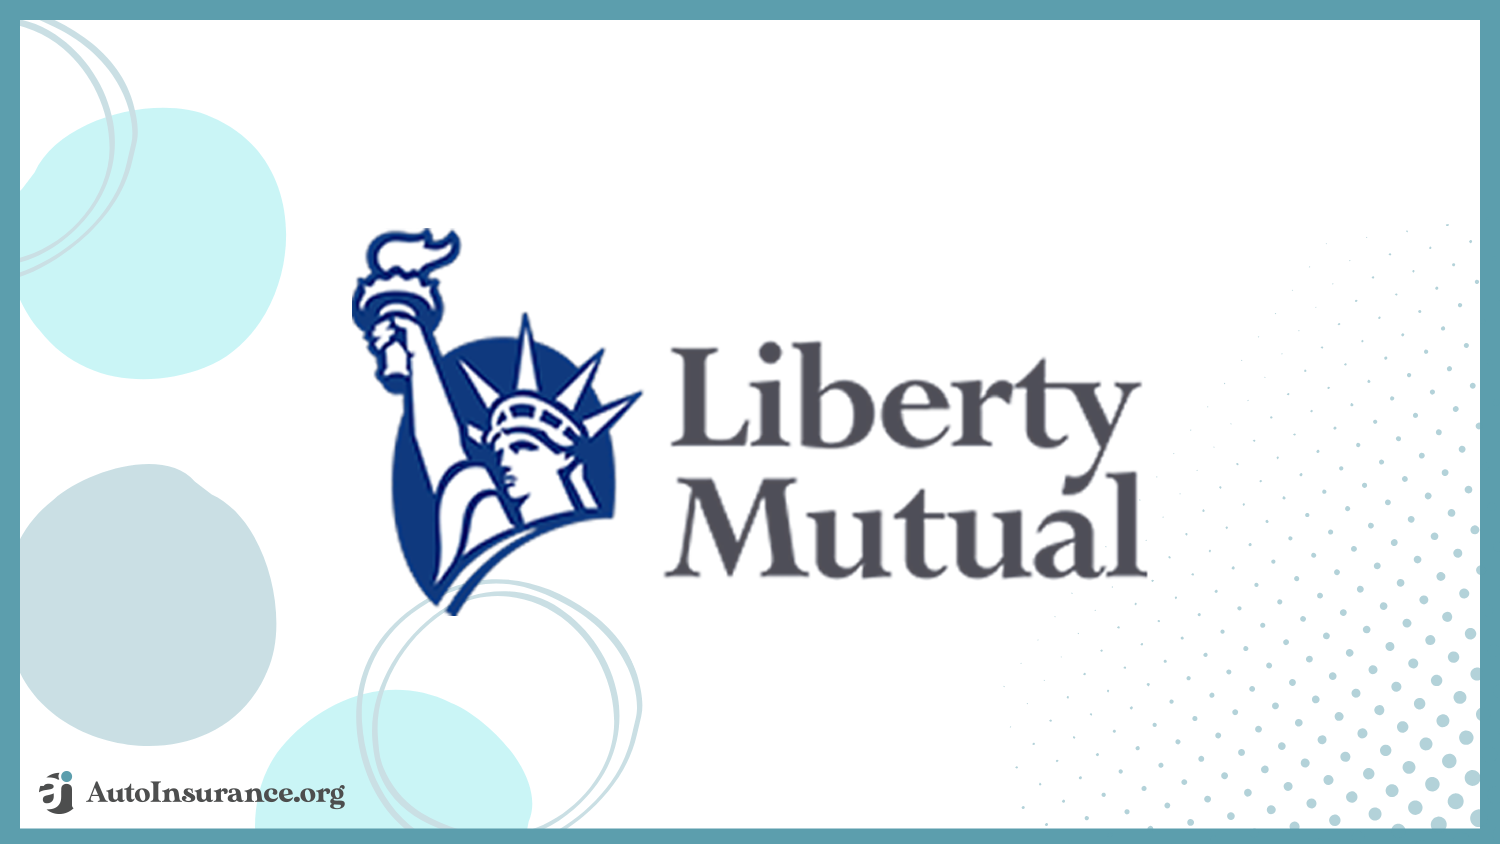 Liberty Mutual: Best Auto Insurance for Wheelchair-Accessible Vehicles